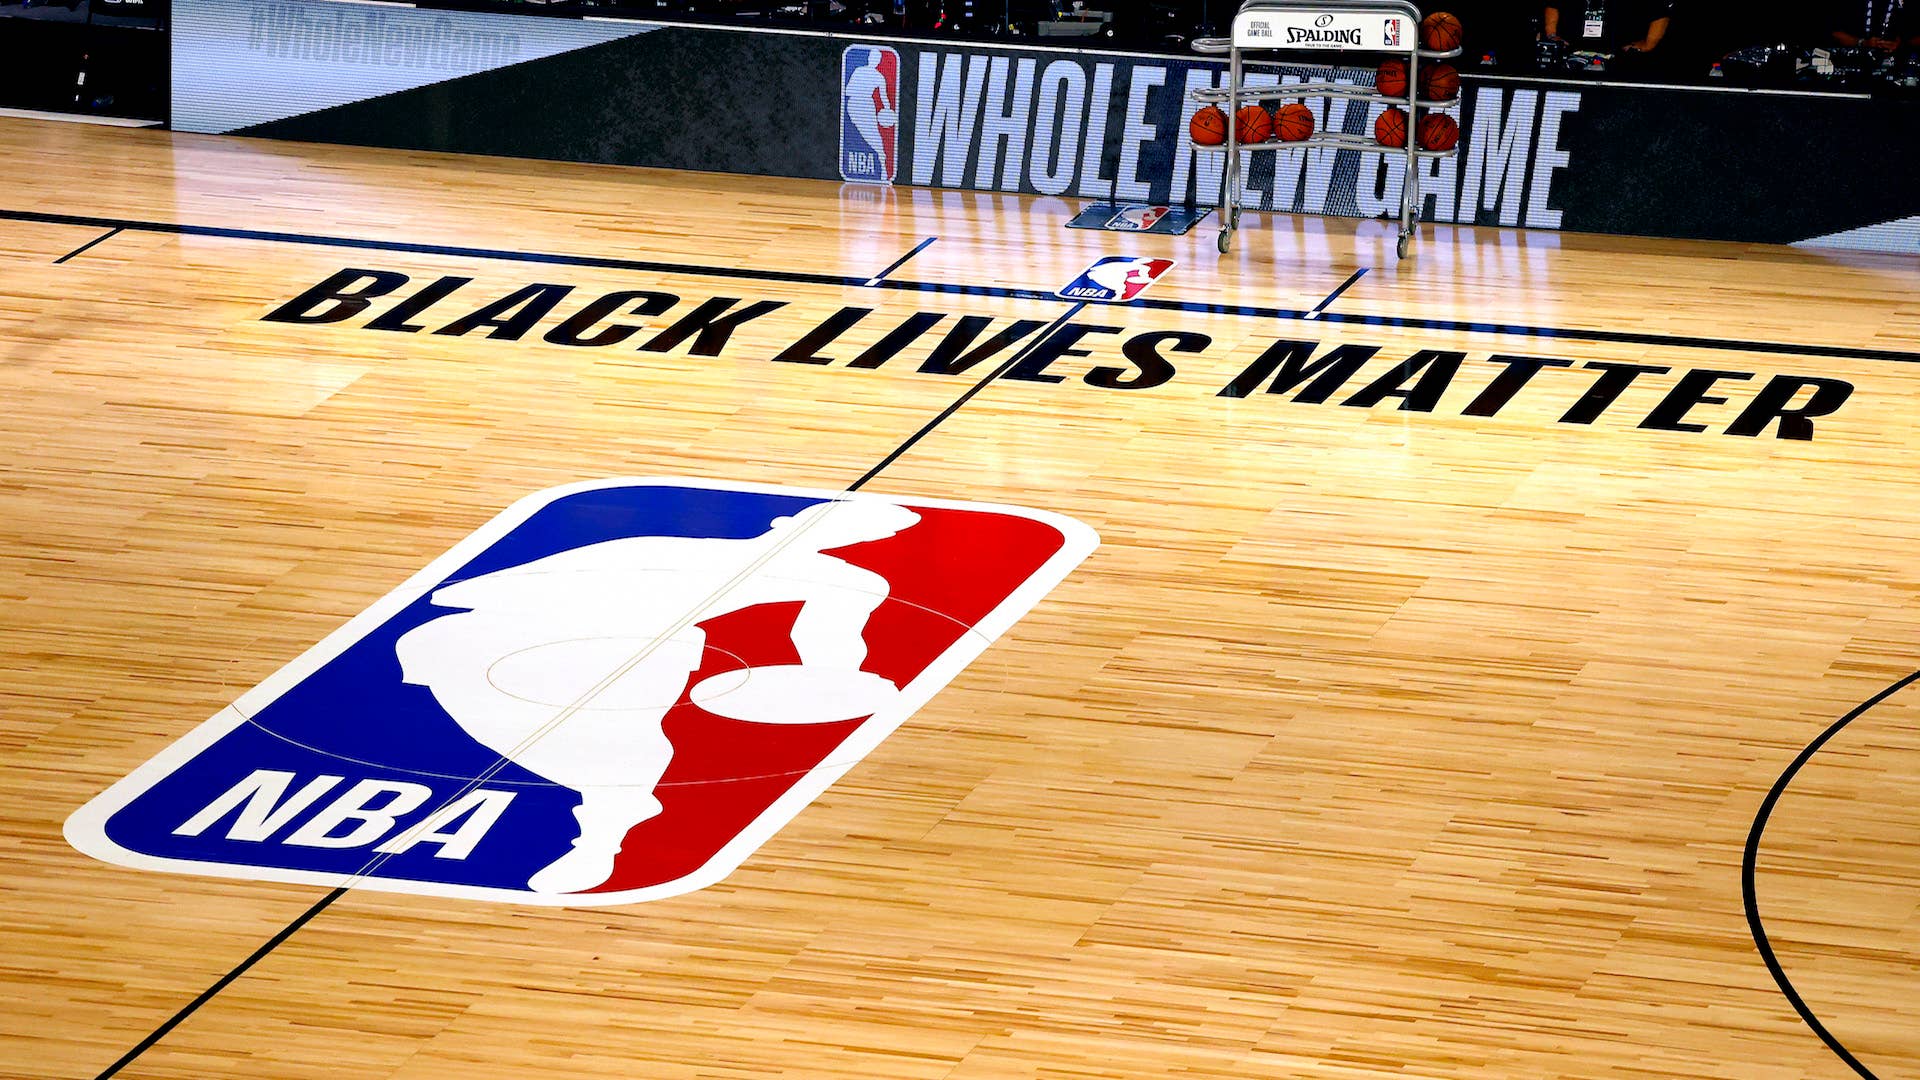 NBA, players agree to 'Black Lives Matter' and other messages to wear on  jerseys